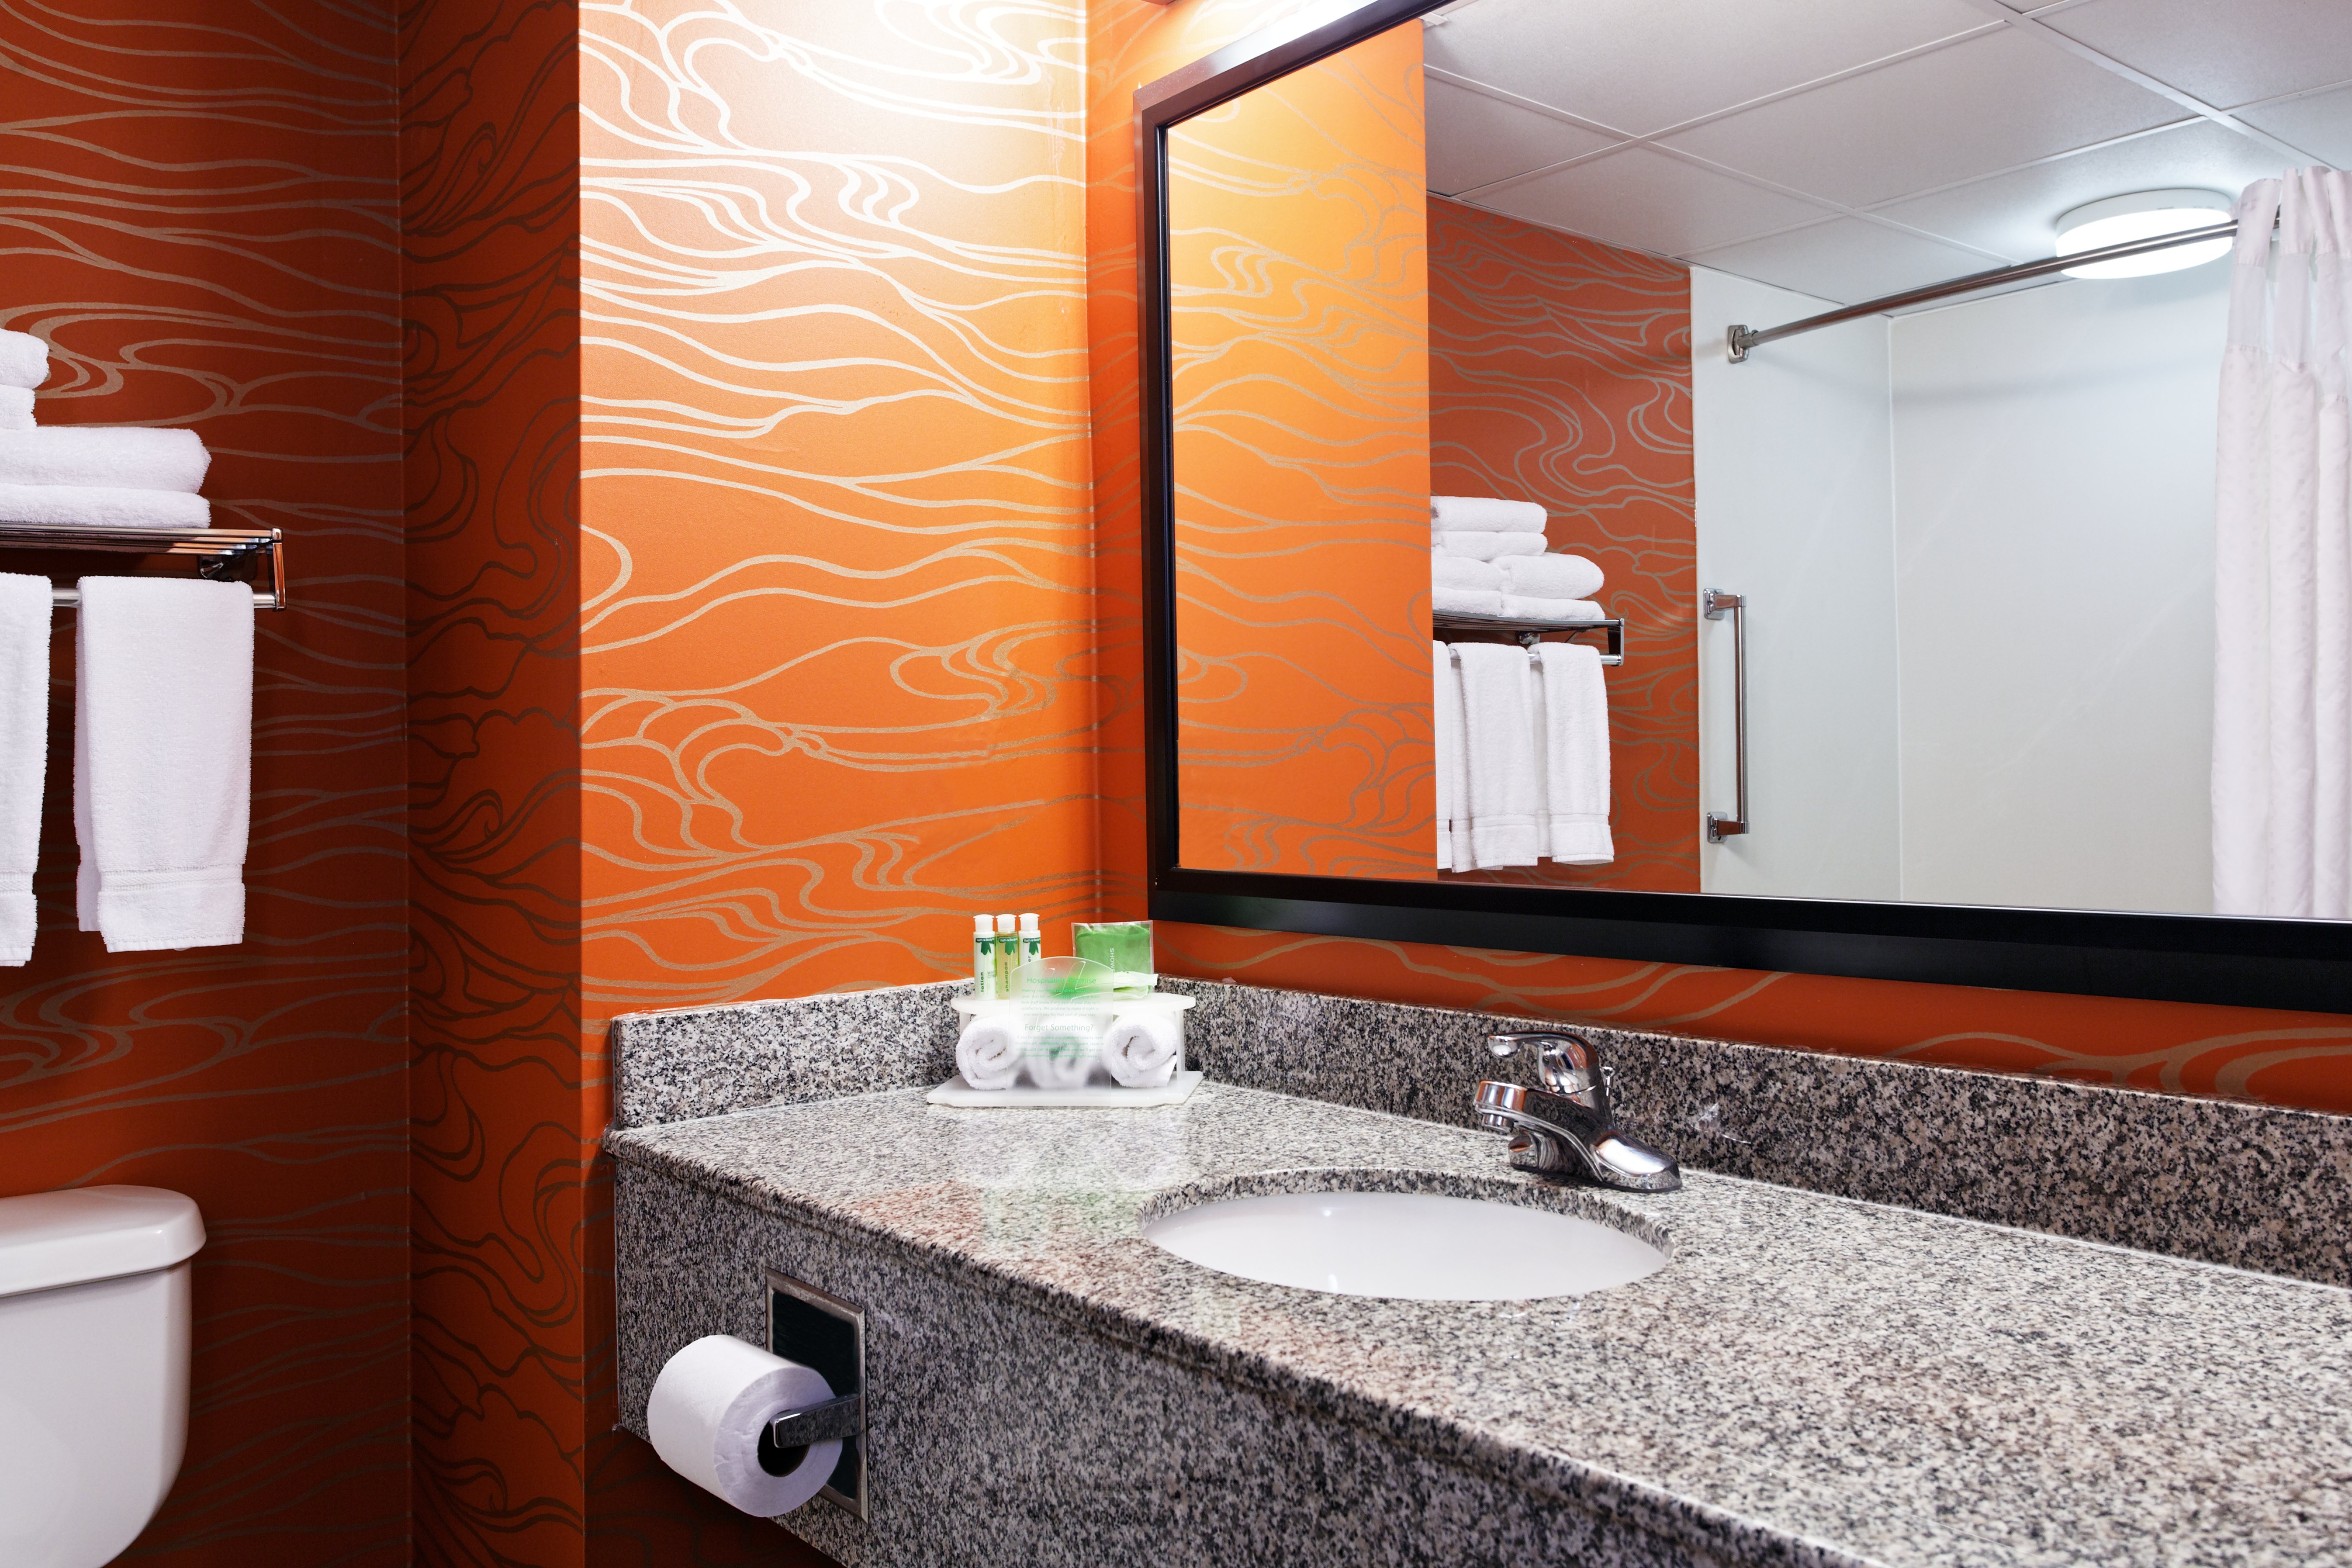 Our recently renovated bathrooms will help you stay refreshed